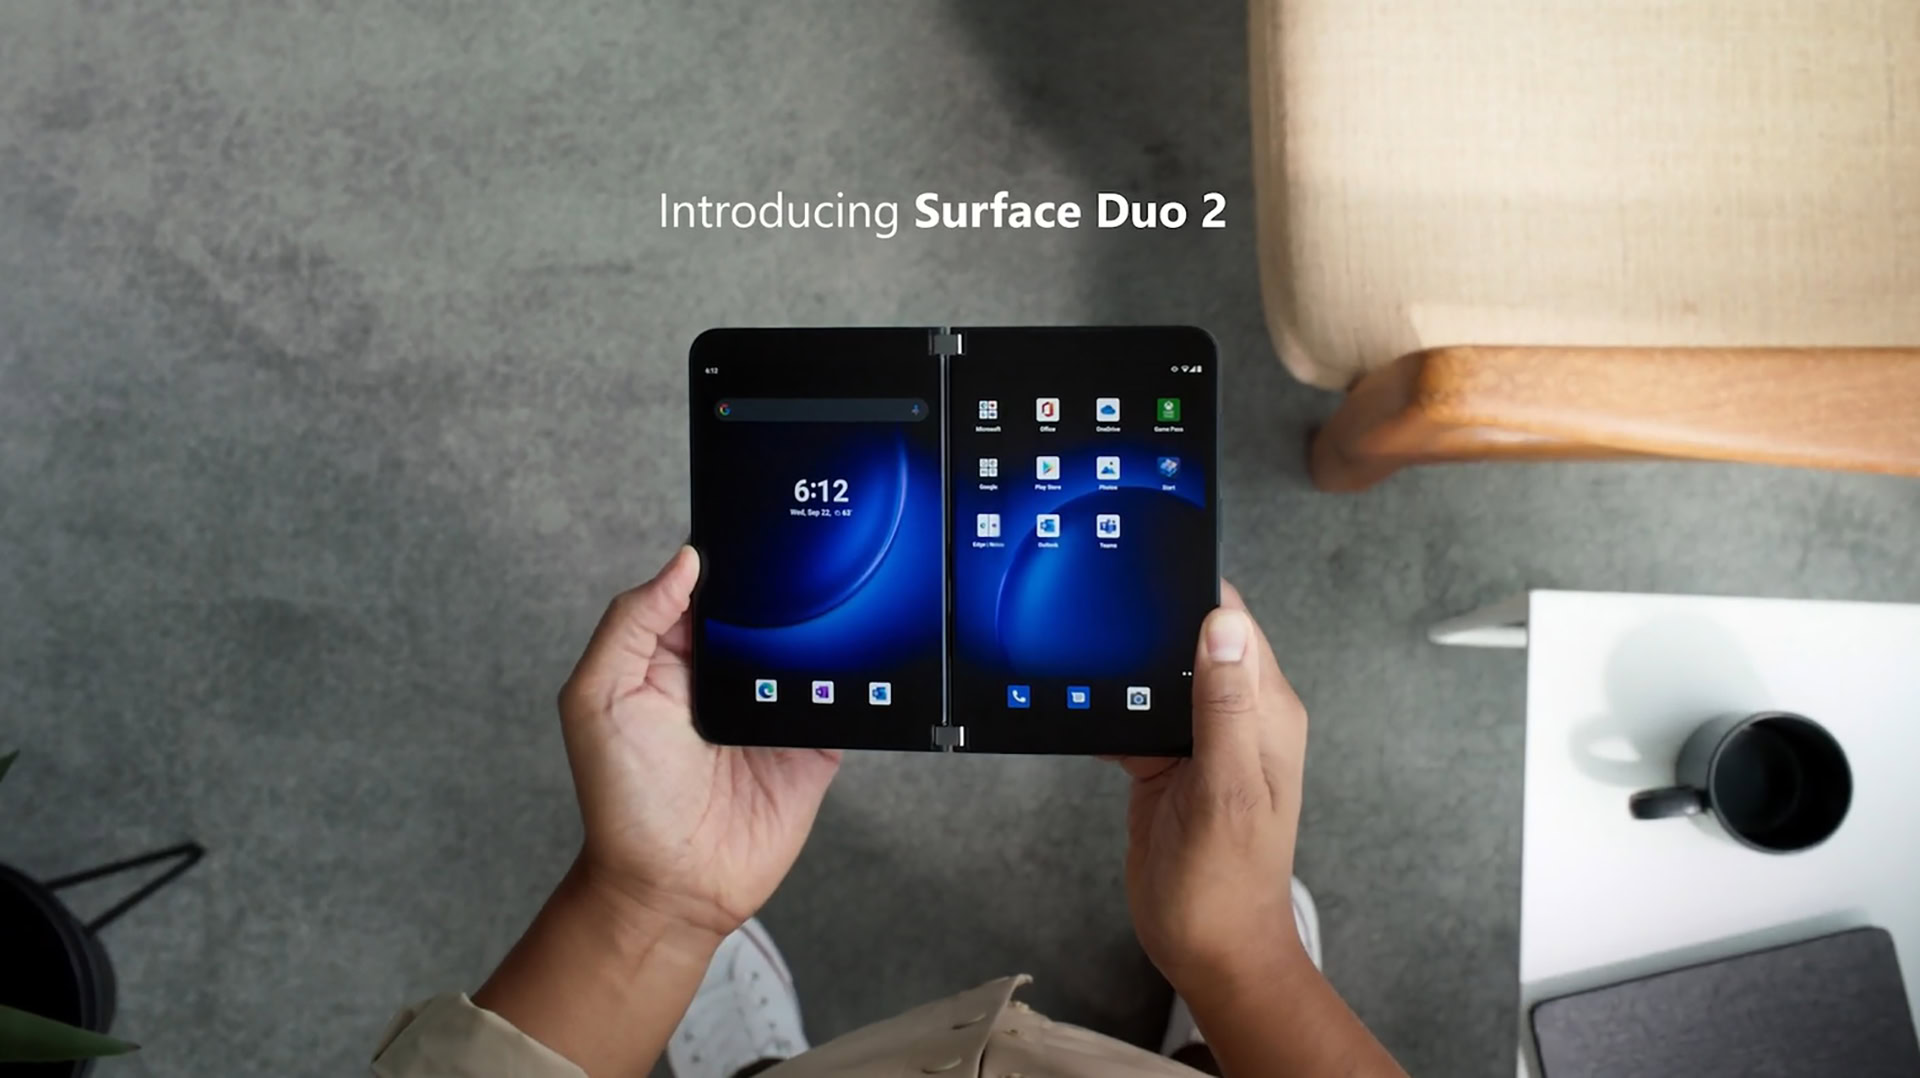 You tell us: Is the Microsoft Surface Duo 2 hot or not?